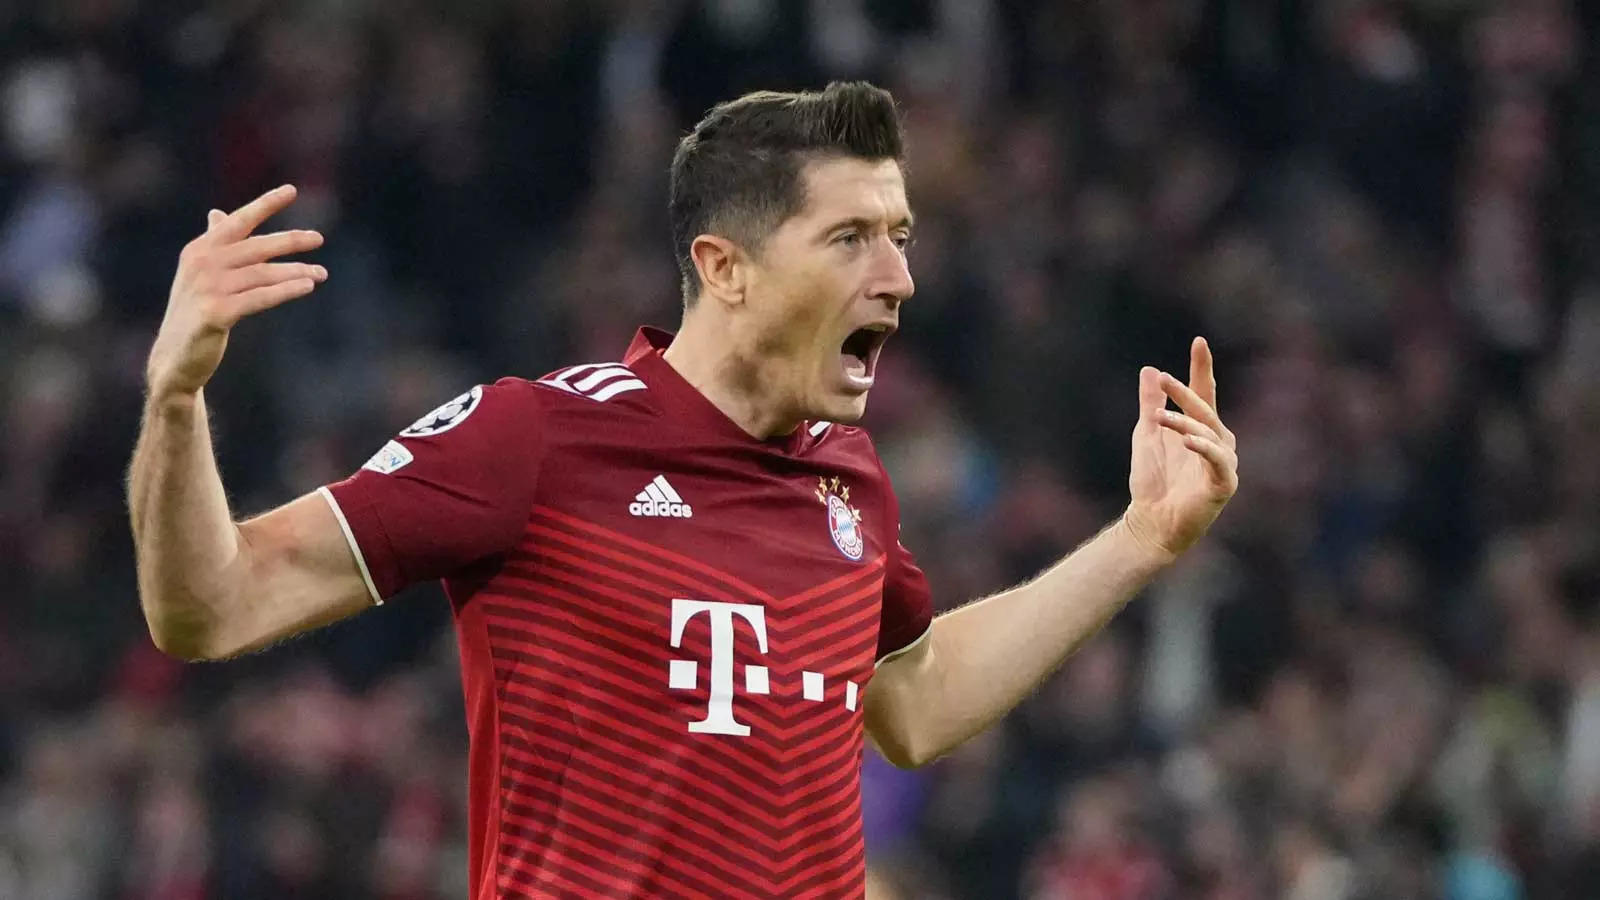 Robert Lewandowski could be on his way out from Bayern